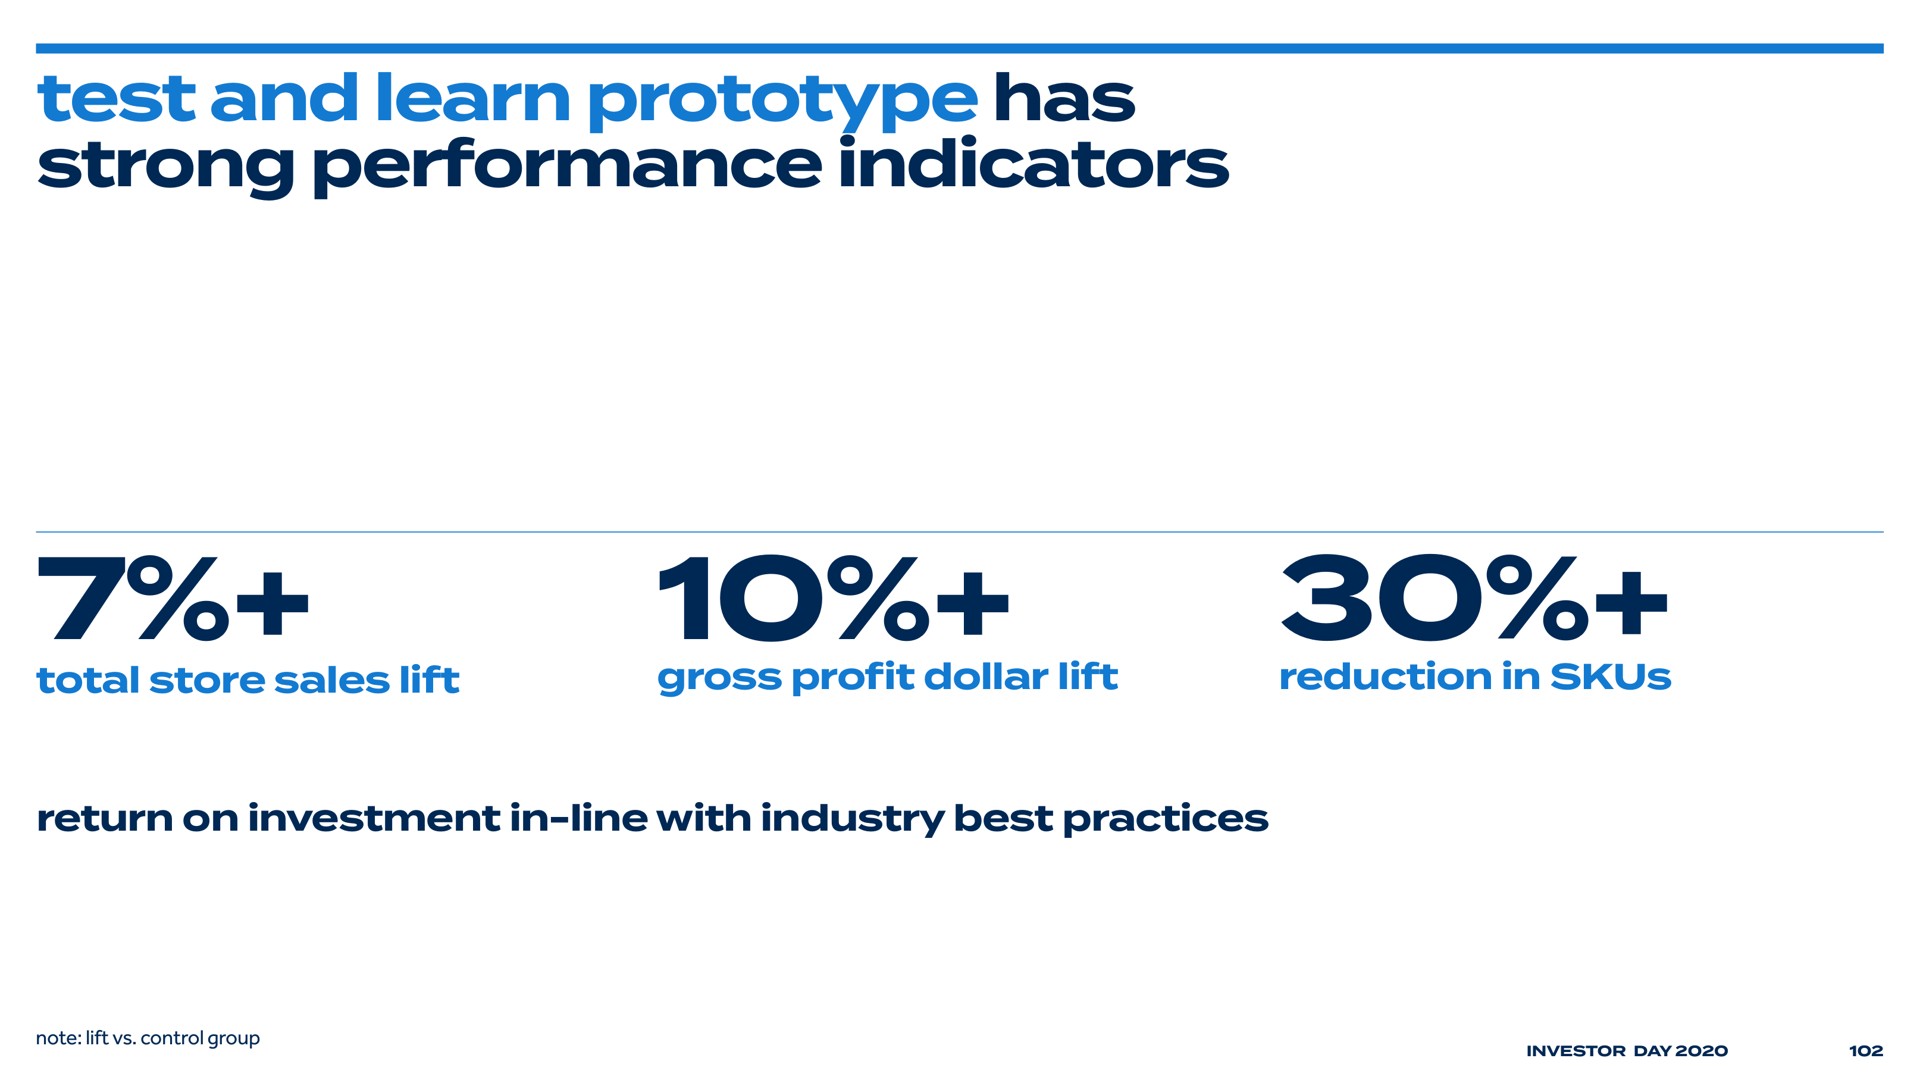 test and learn prototype has strong performance indicators | Bed Bath & Beyond